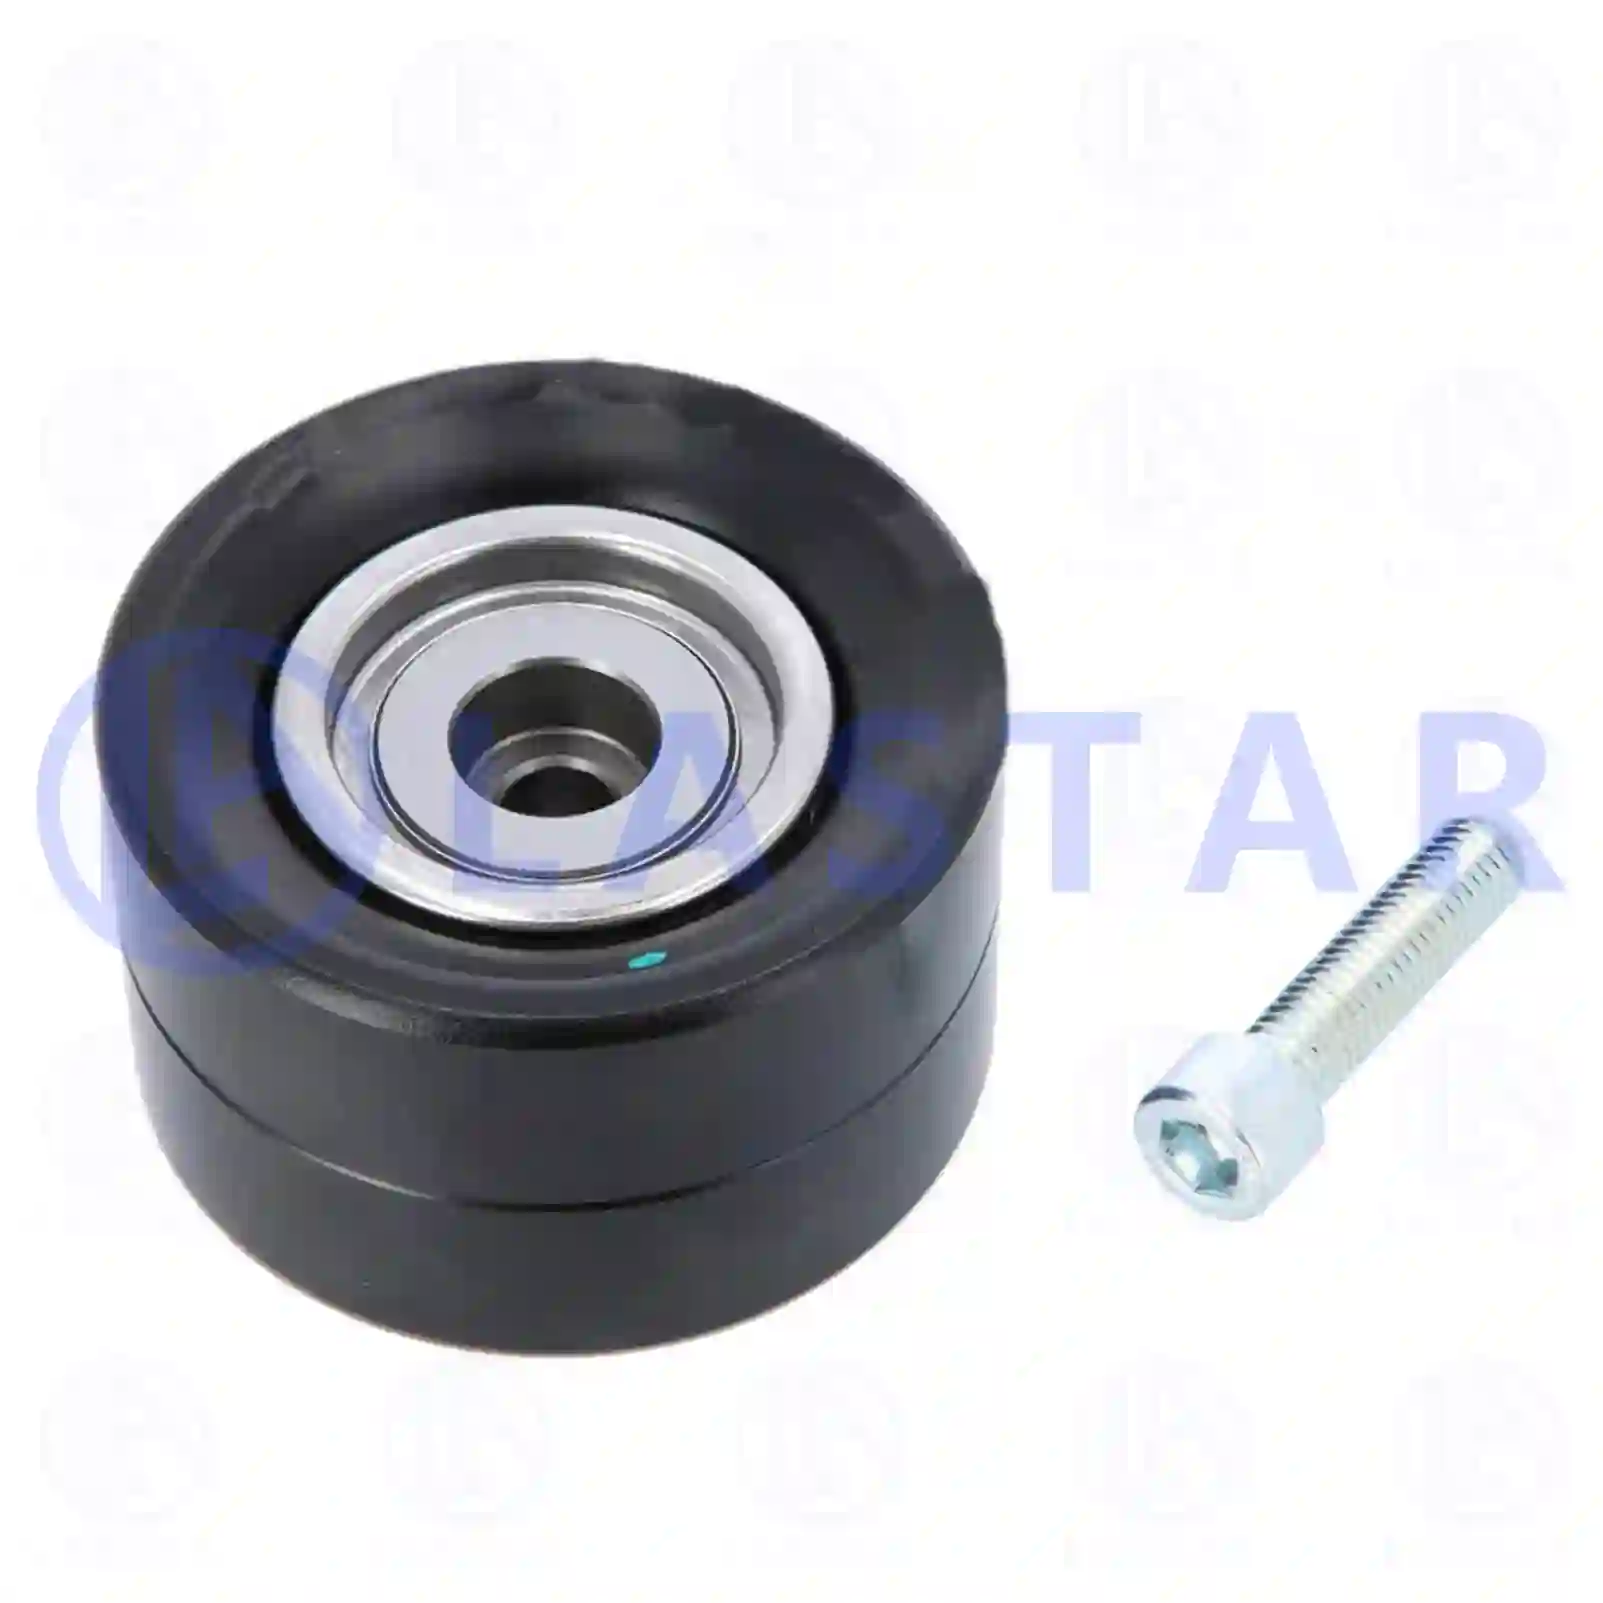 Tension roller, with screw, 77707962, 0005501333, ZG02180-0008 ||  77707962 Lastar Spare Part | Truck Spare Parts, Auotomotive Spare Parts Tension roller, with screw, 77707962, 0005501333, ZG02180-0008 ||  77707962 Lastar Spare Part | Truck Spare Parts, Auotomotive Spare Parts